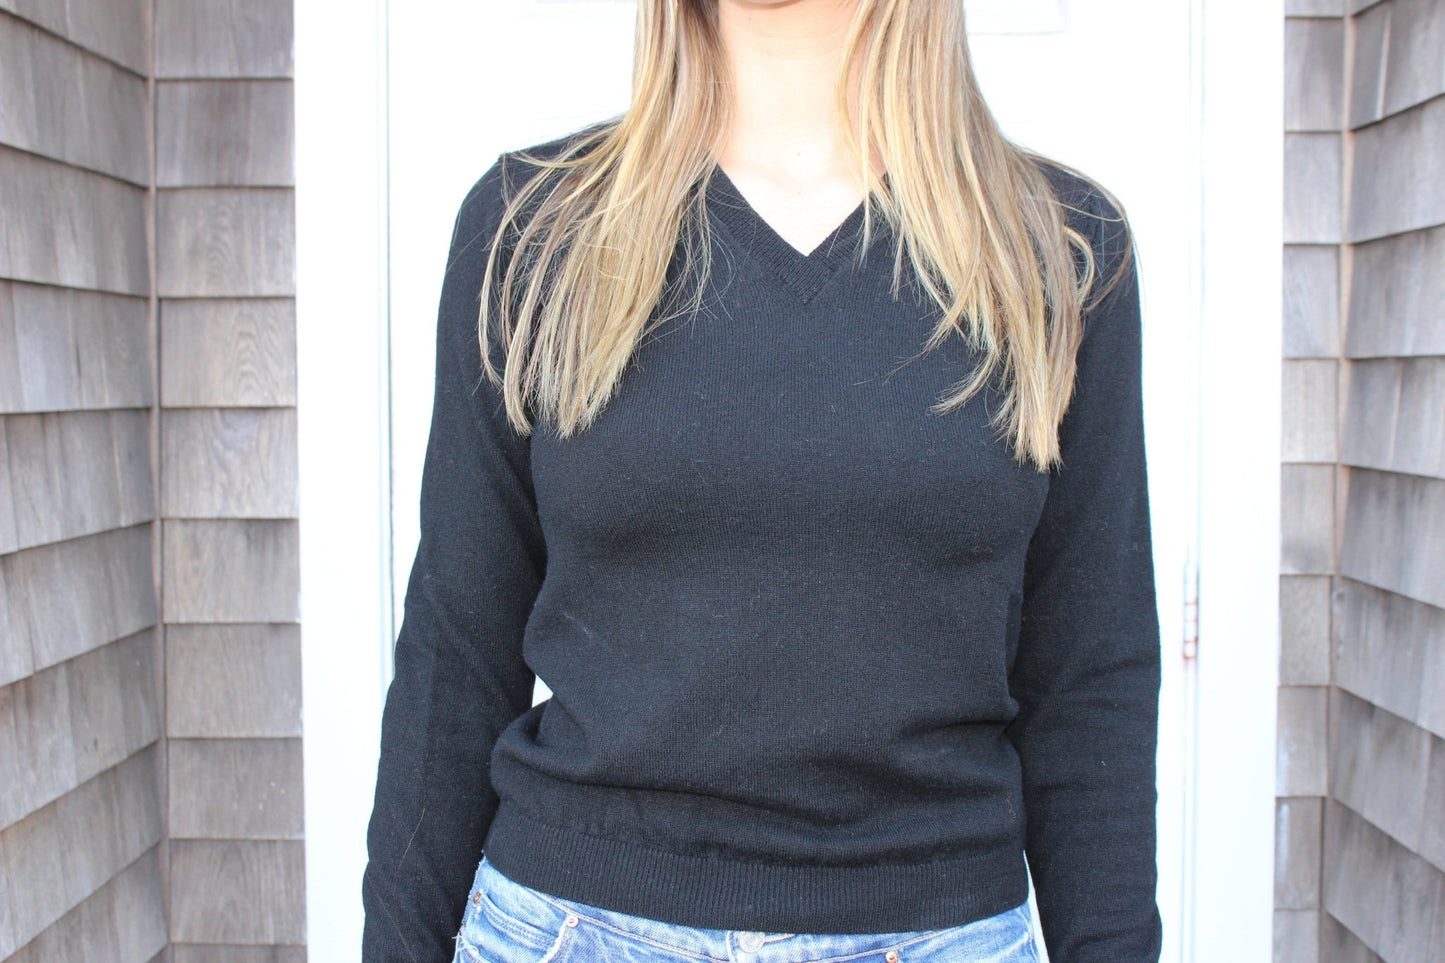 V Neck Sweater - thegreatputonmvV Neck SweaterV Neck SweaterV Neck SweaterSweaterGretchen Nealthegreatputonmv105422V Neck fitted sweater 100% cashmere Made in ItalyS23126201